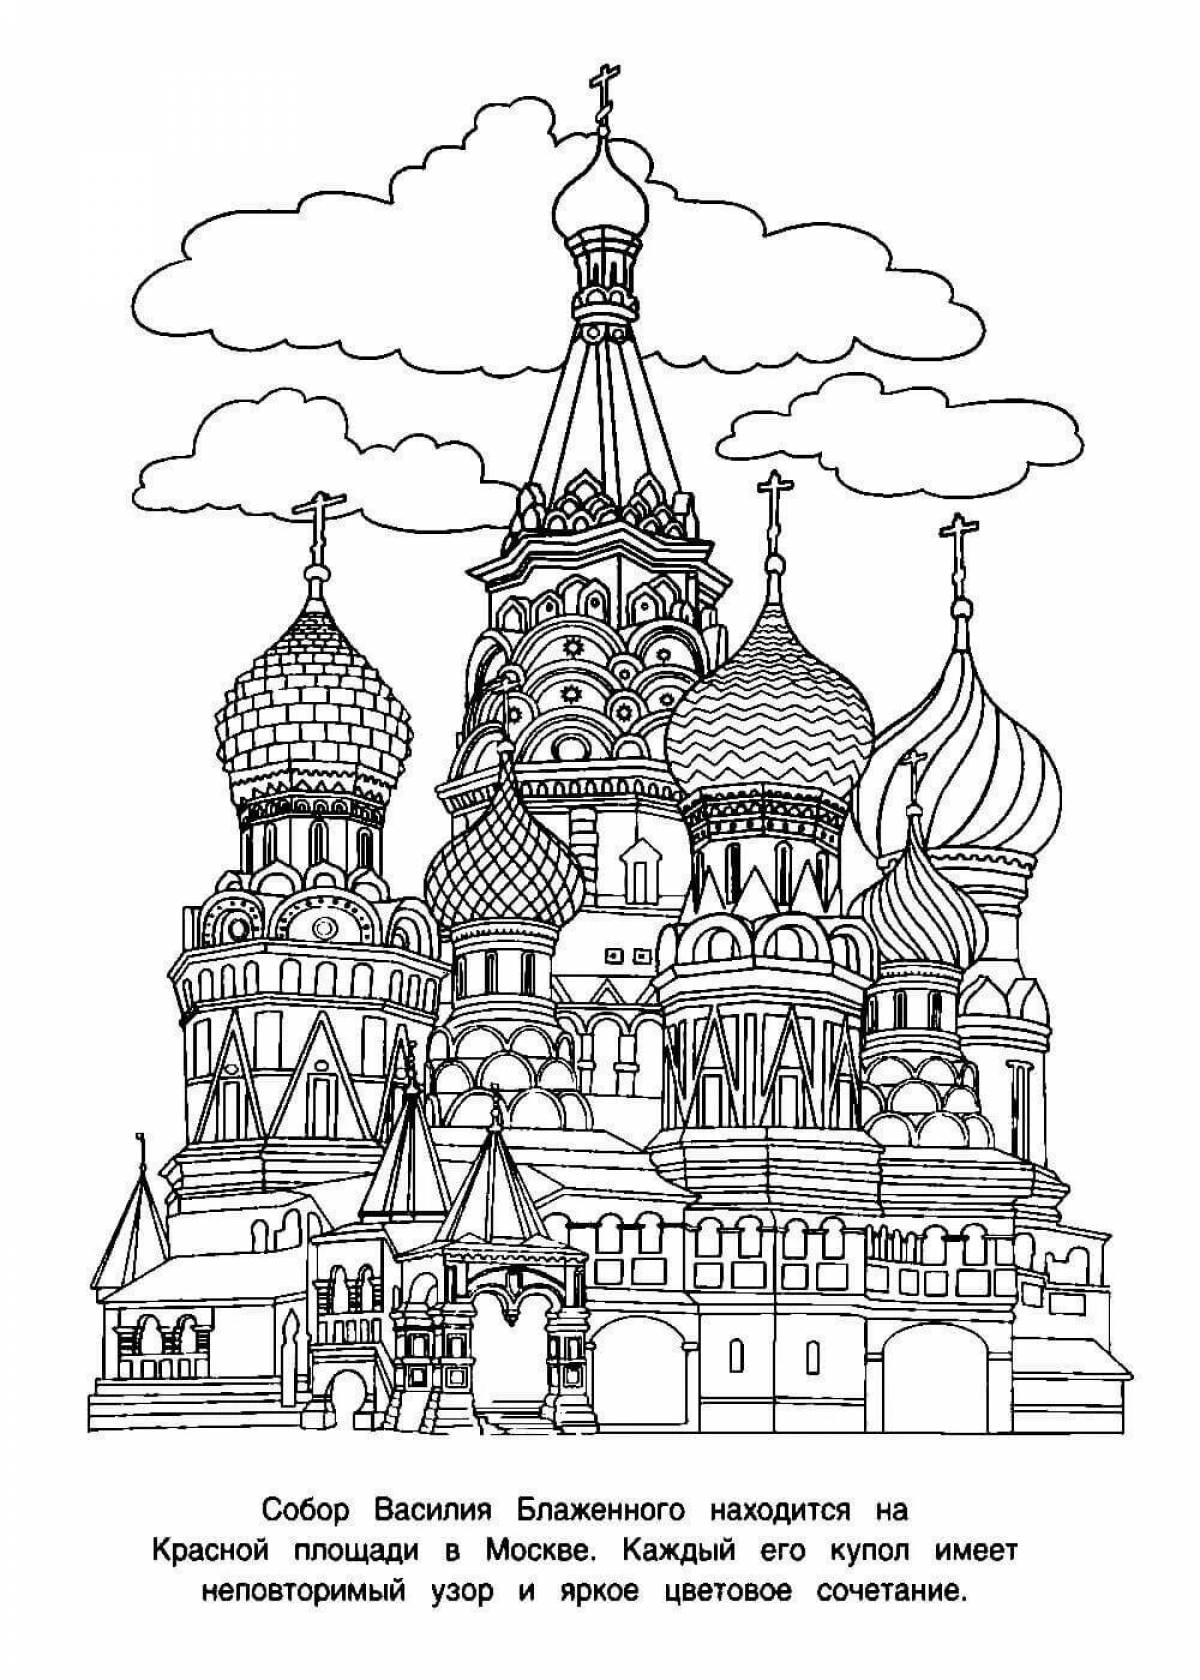 St. Basil's Cathedral for children #14